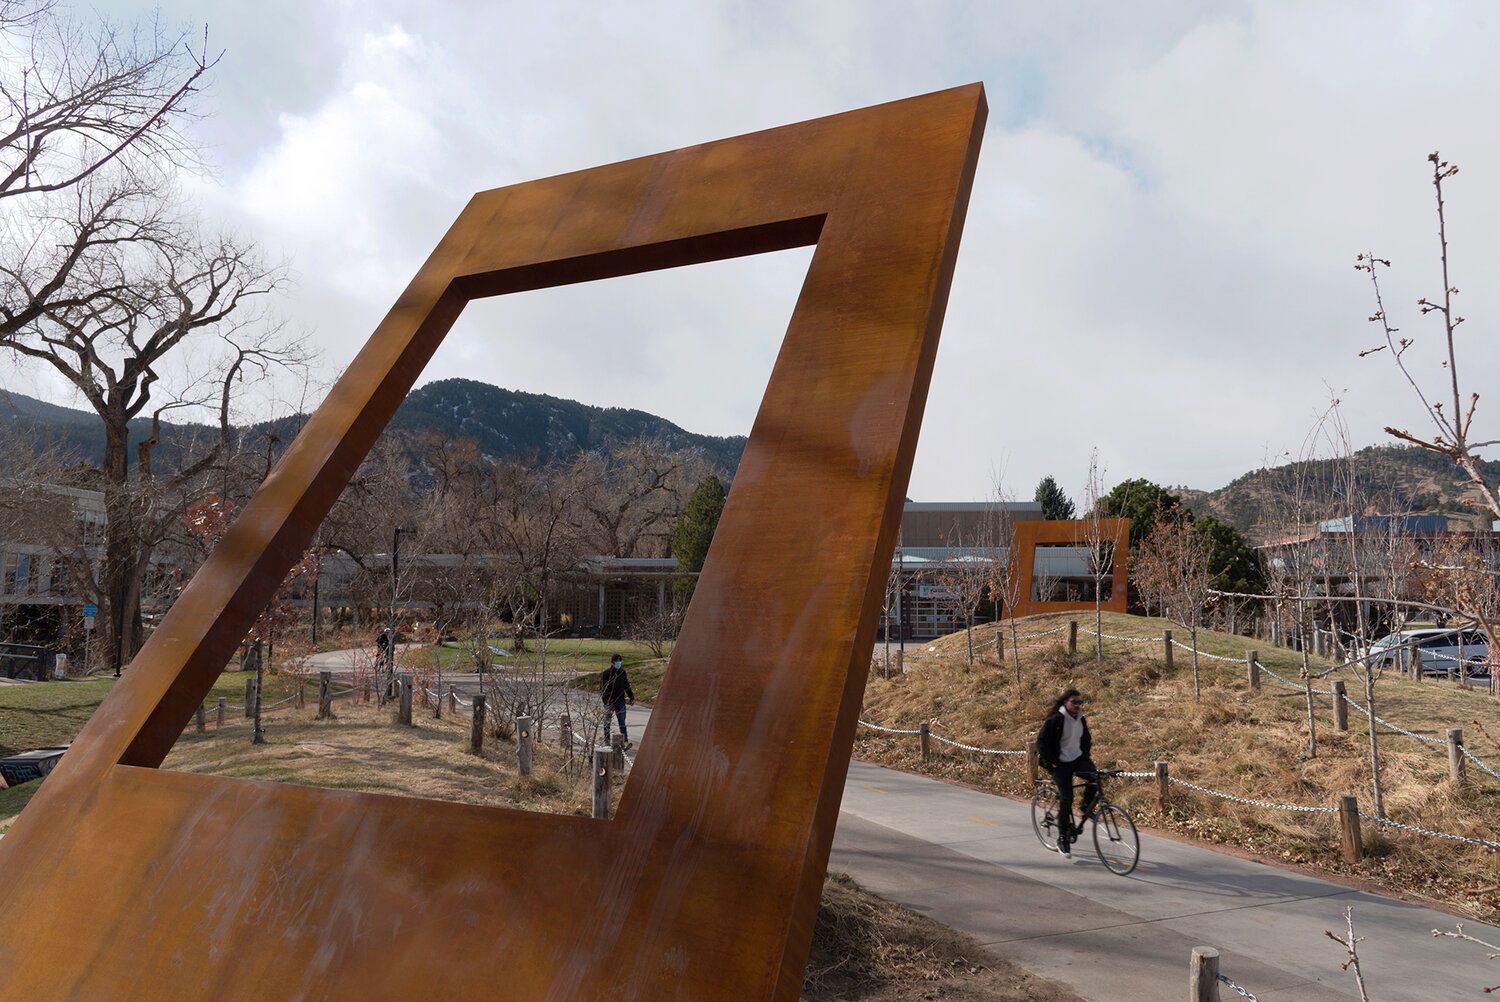 Public art on Boulder bike path with pedestrian and cyclist travel